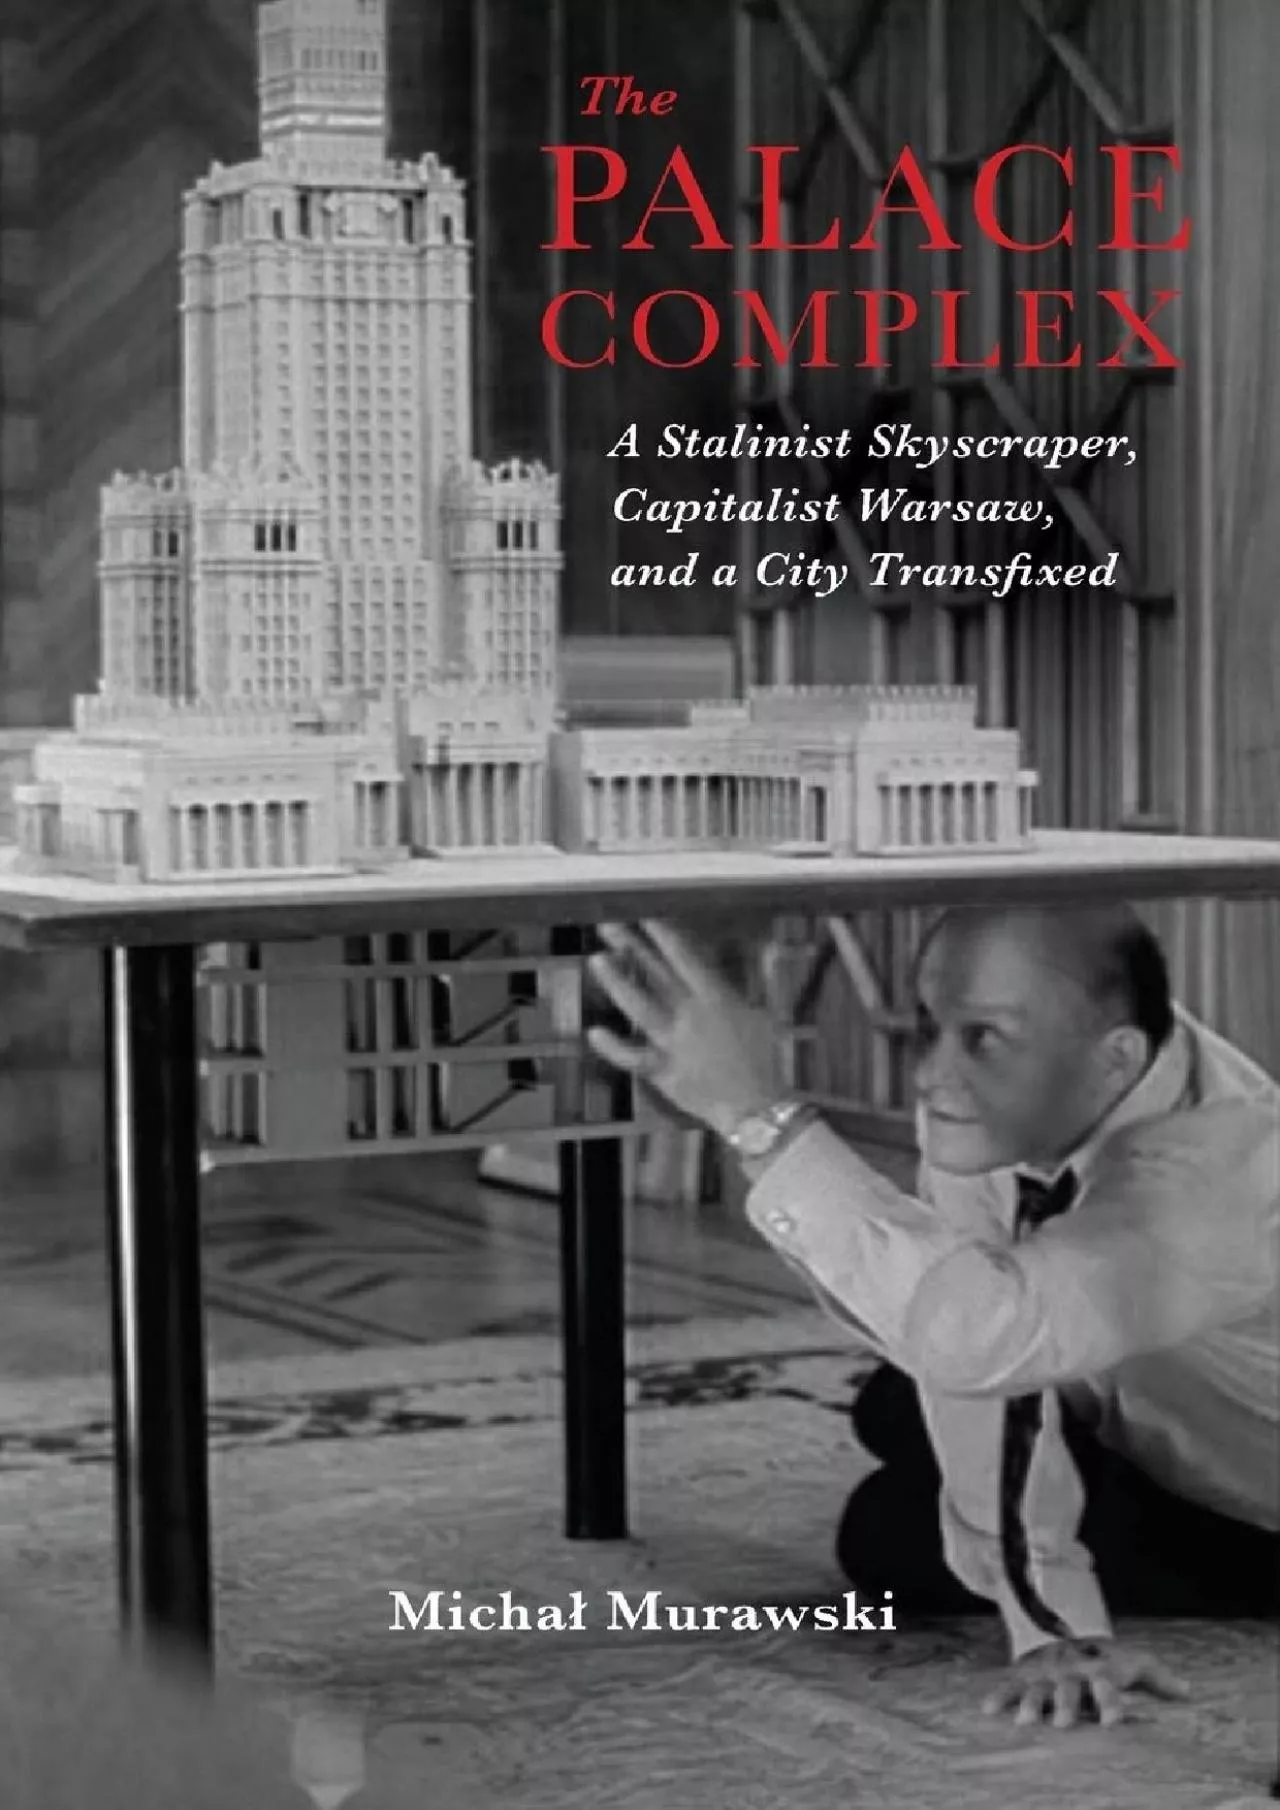 (DOWNLOAD)-The Palace Complex: A Stalinist Skyscraper, Capitalist Warsaw, and a City Transfixed